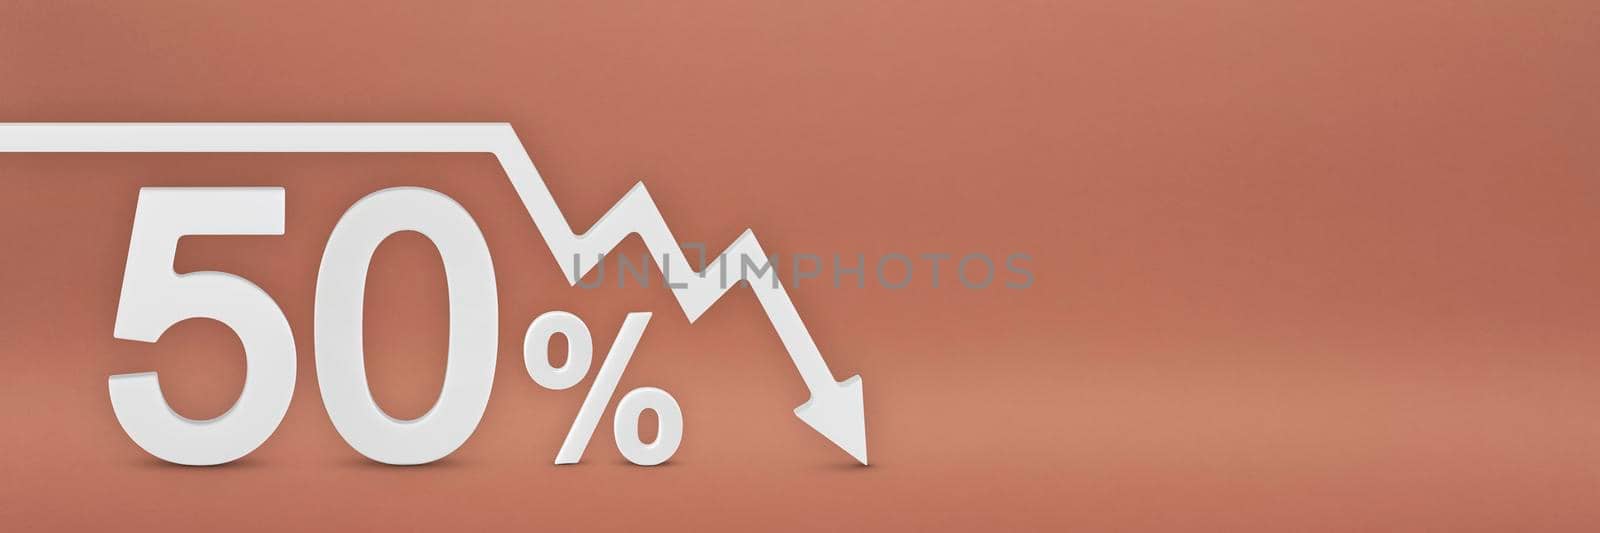 fifty percent, the arrow on the graph is pointing down. Stock market crash, bear market, inflation.Economic collapse, collapse of stocks.3d banner, 50 percent discount sign on a red background. by SERSOL